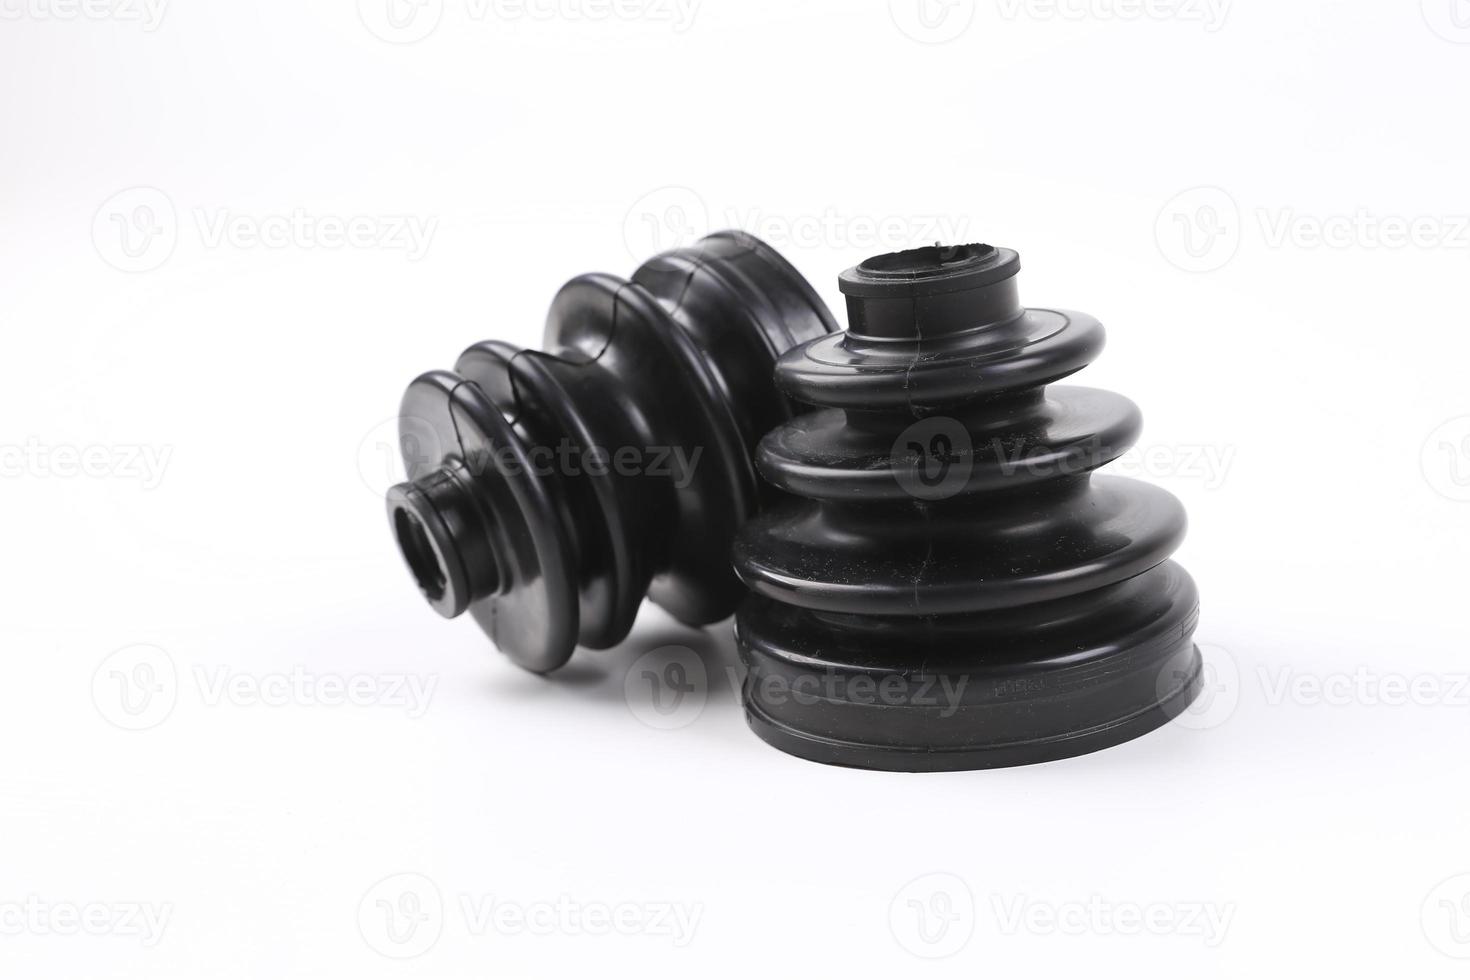 Automobile axle boots or CV joint boots photo